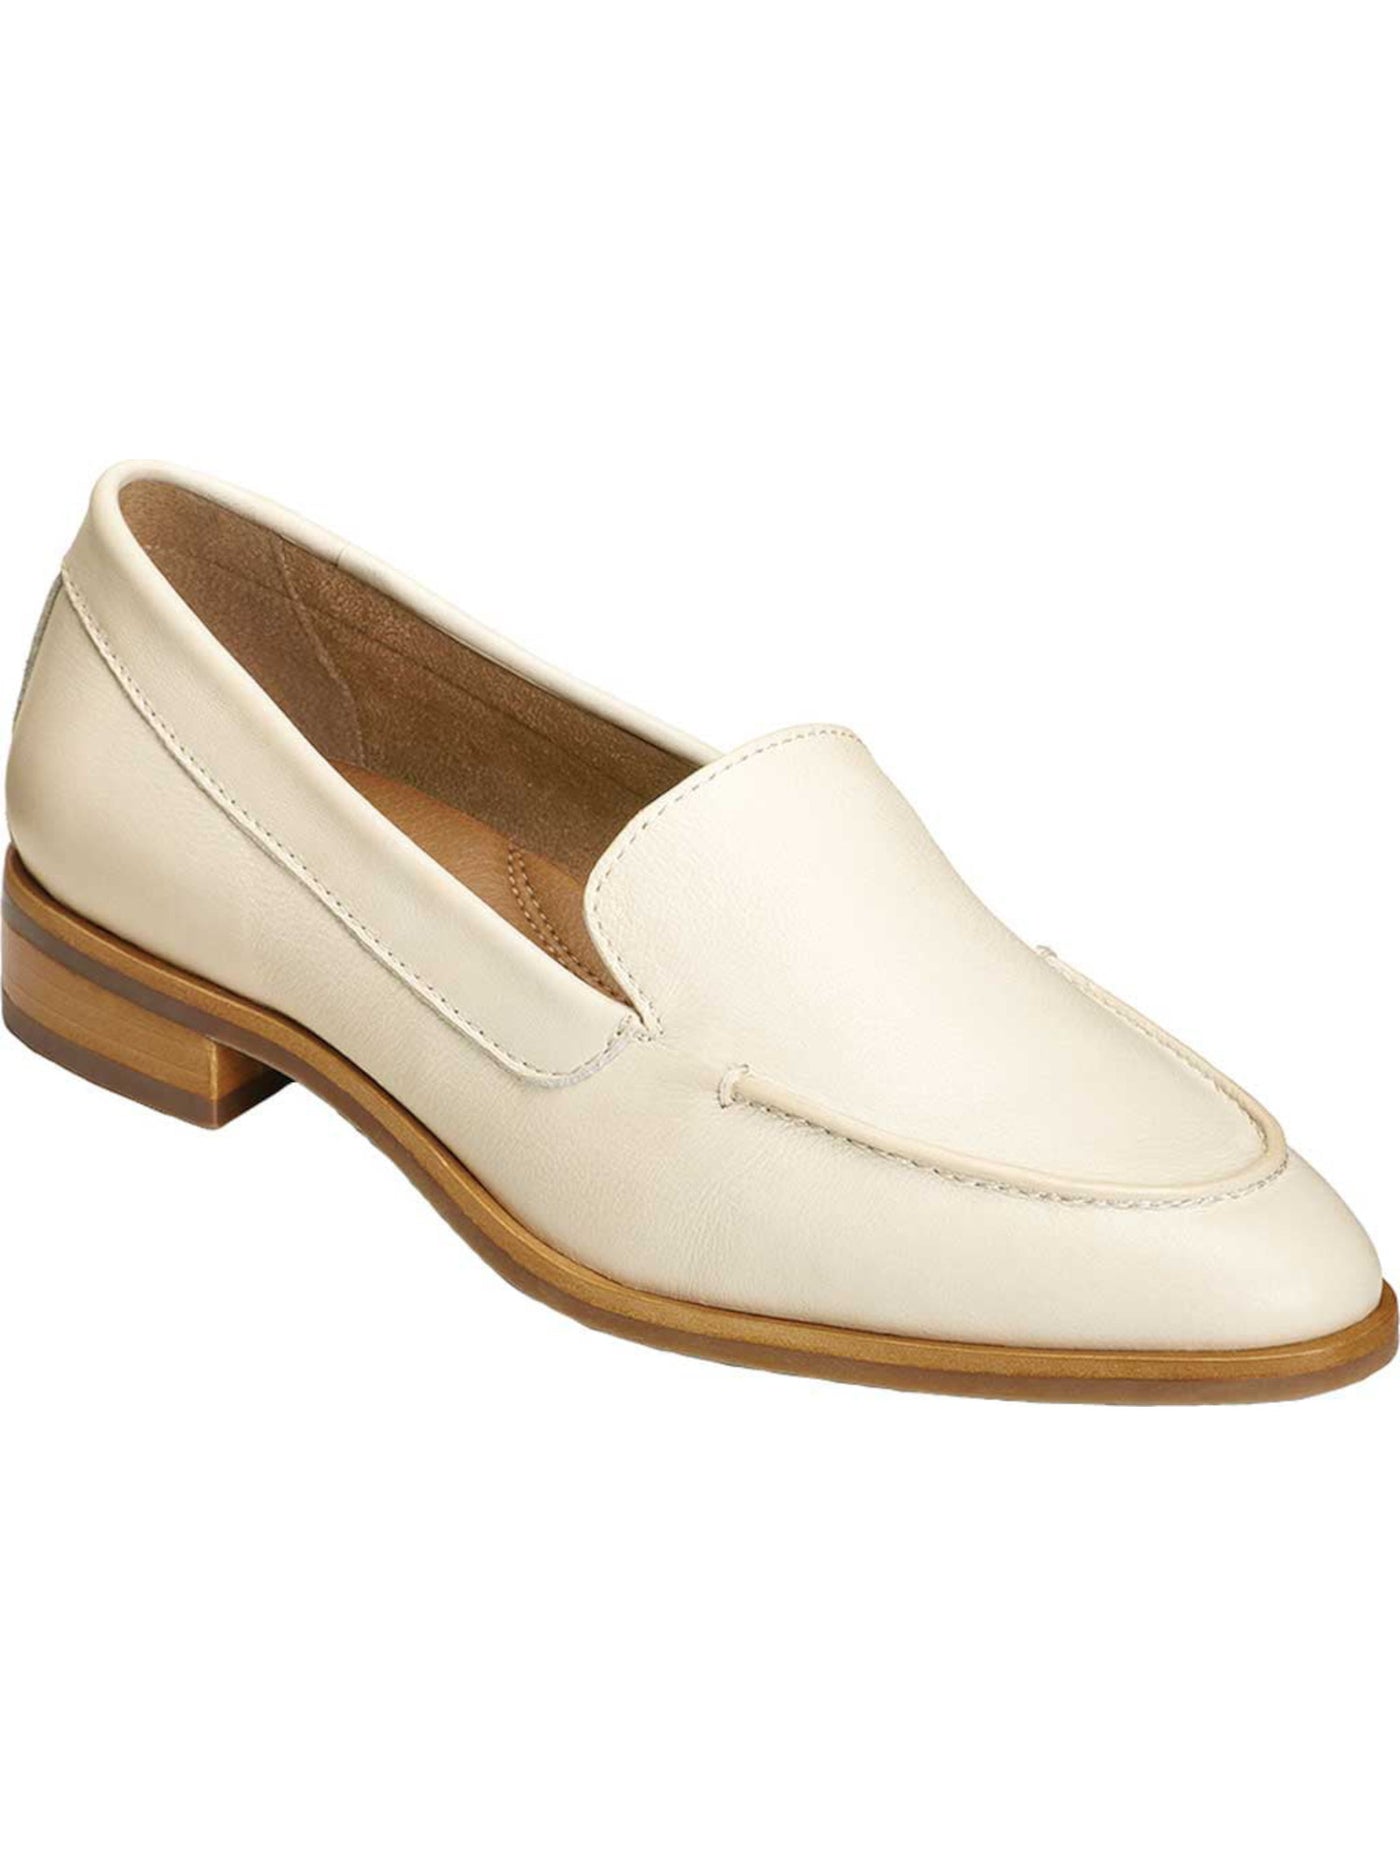 AEROSOLES Womens Ivory Burnished Finish Notched Upper Cushioned East Side Almond Toe Stacked Heel Slip On Leather Loafers 7.5 M